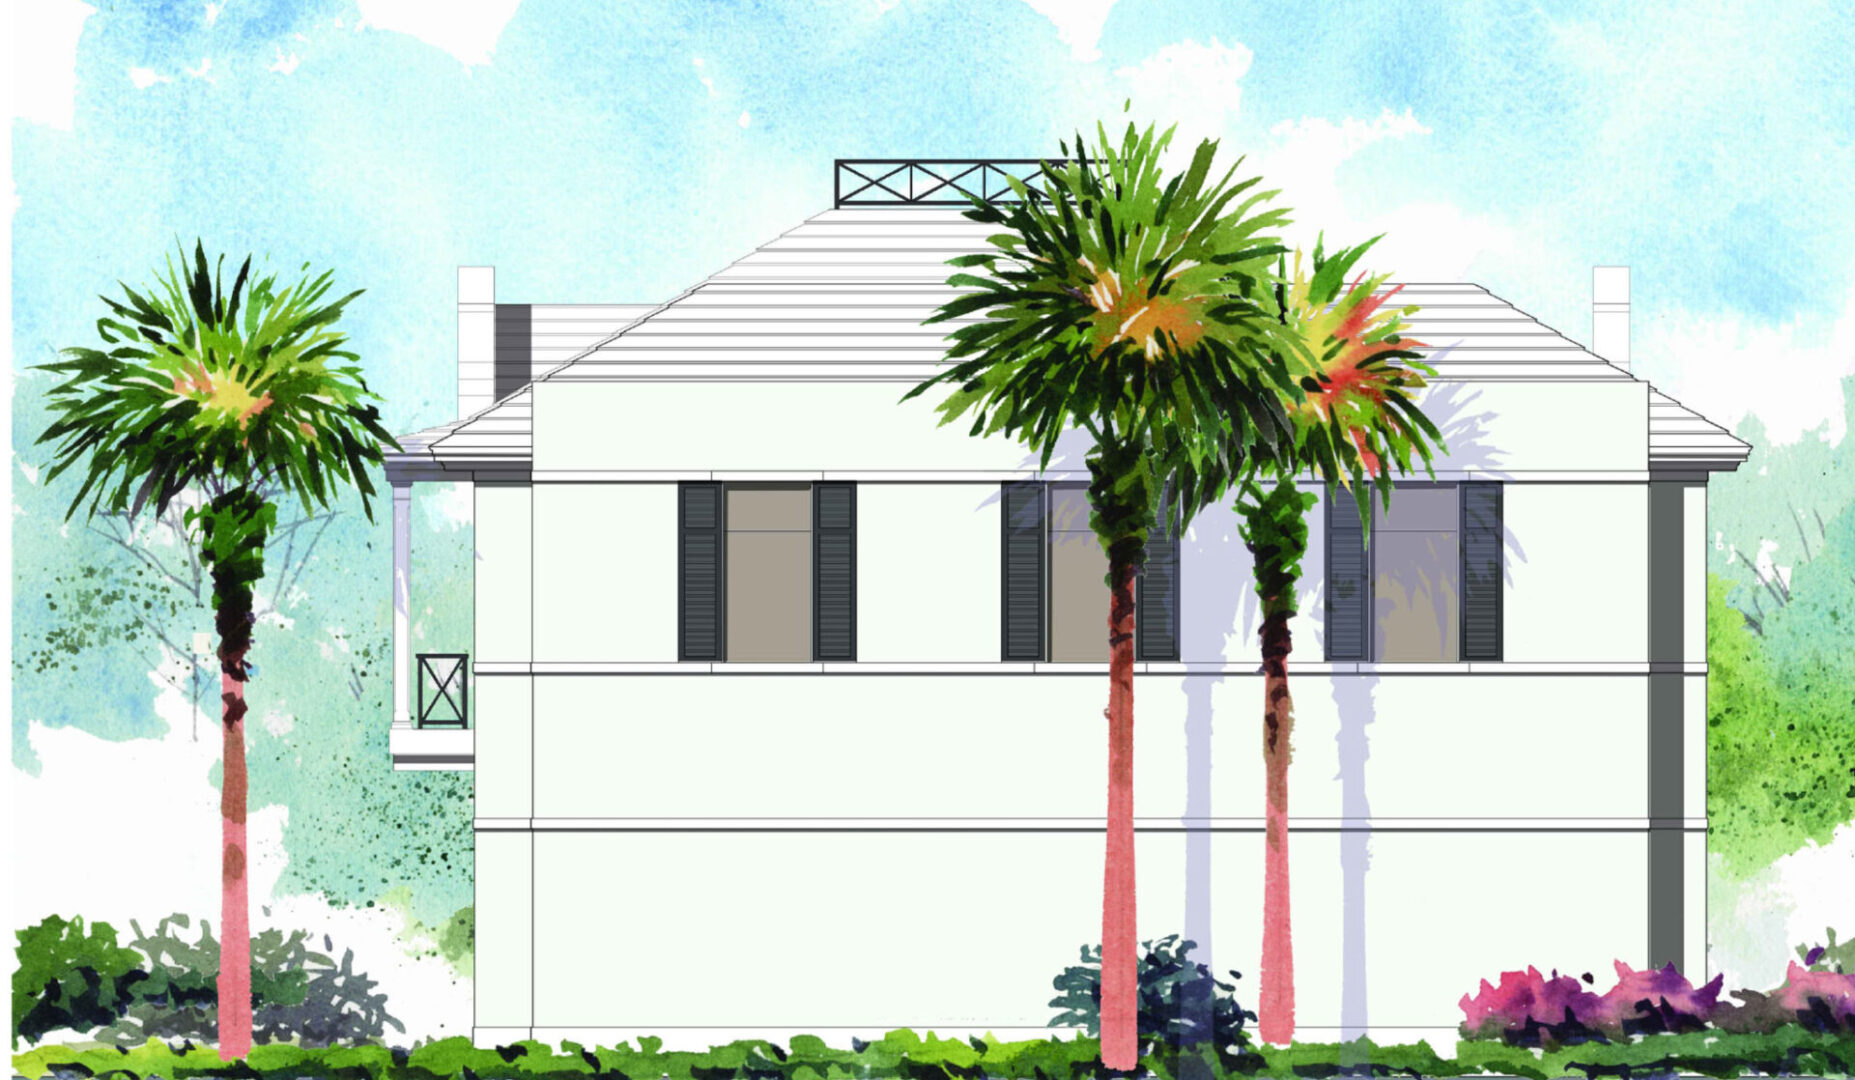 A drawing of two palm trees in front of a building.